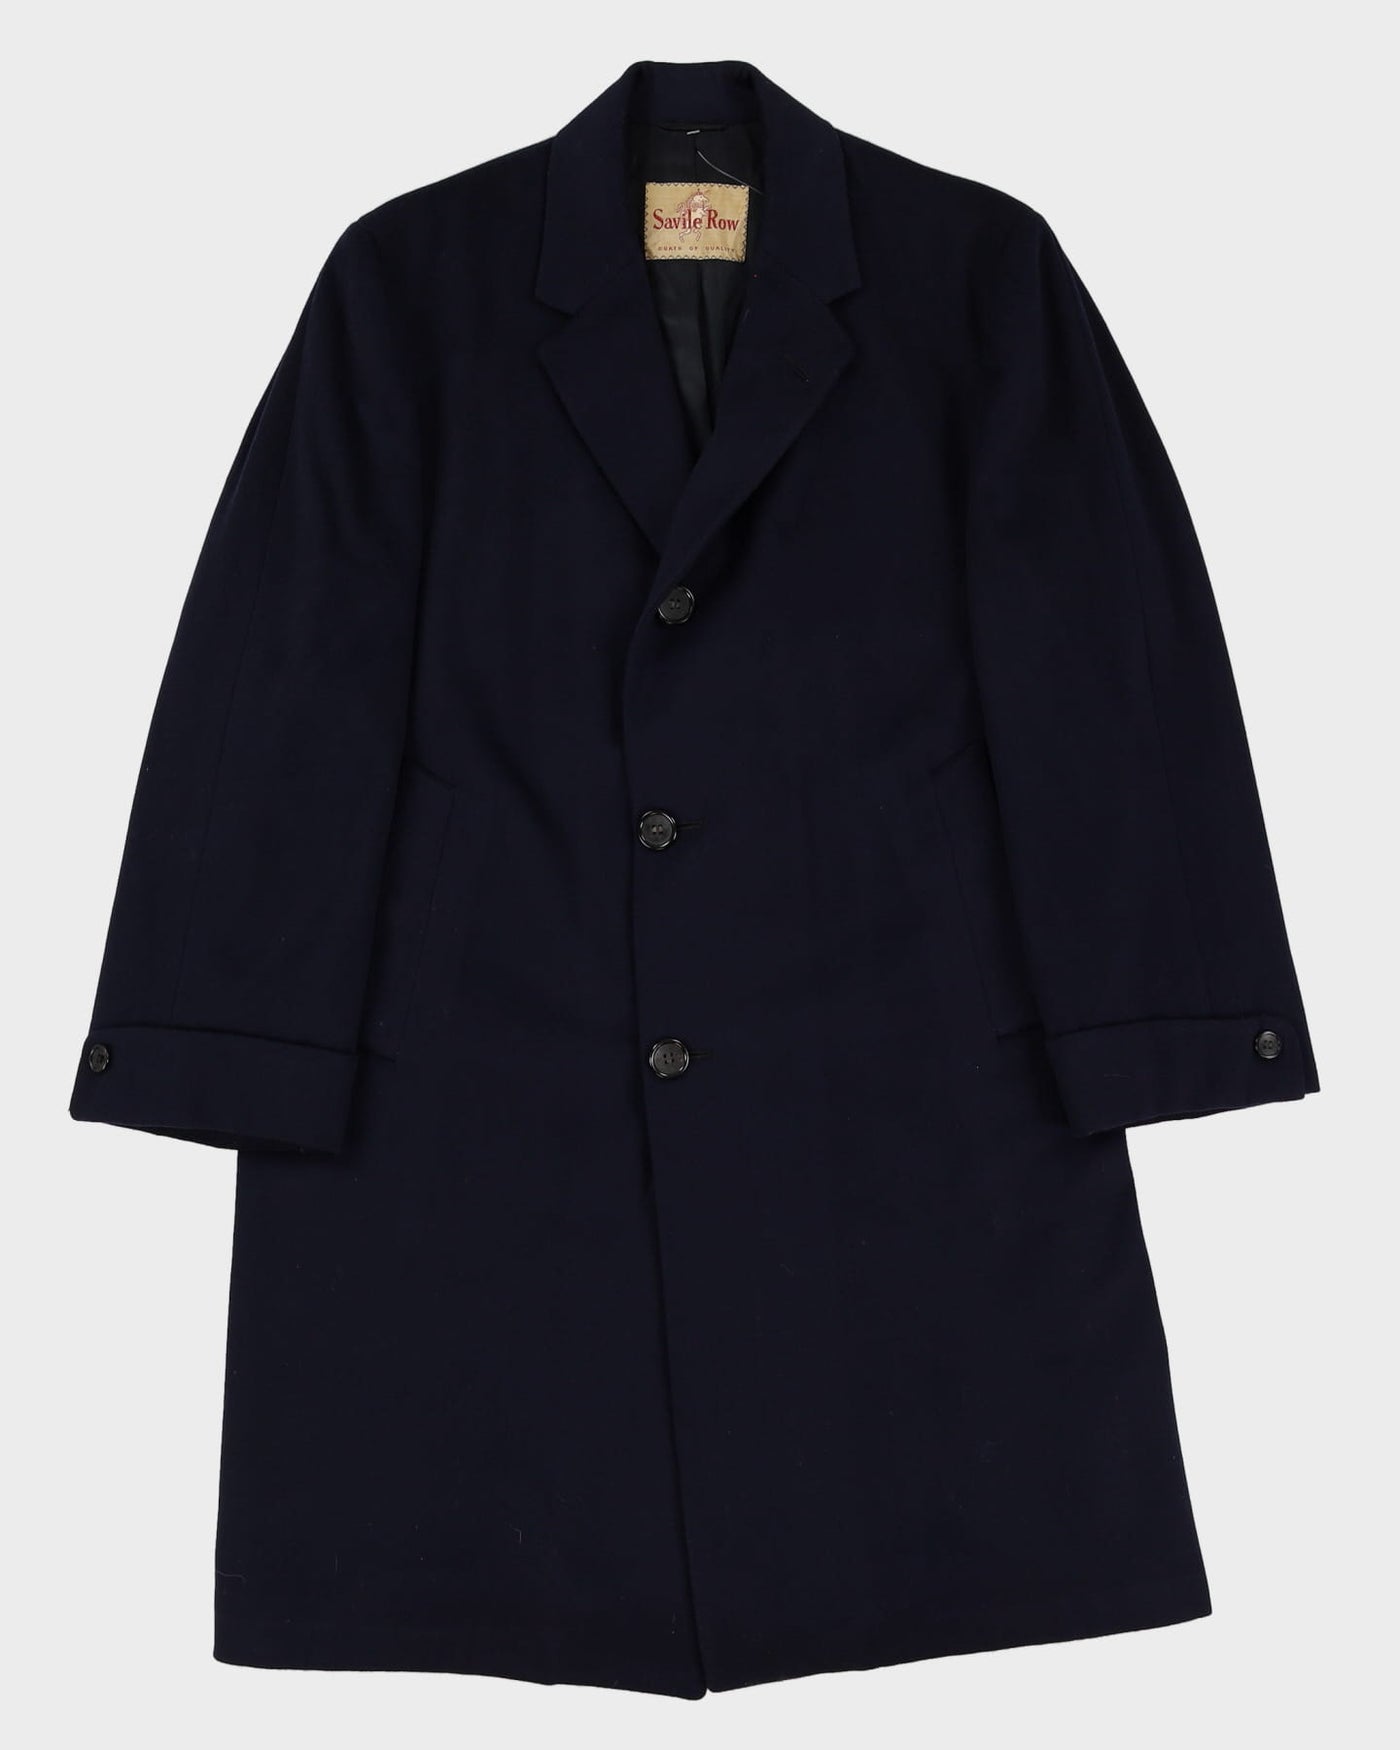 Savile Row Strachan And Co Ltd Cashmere Blend Overcoat - S